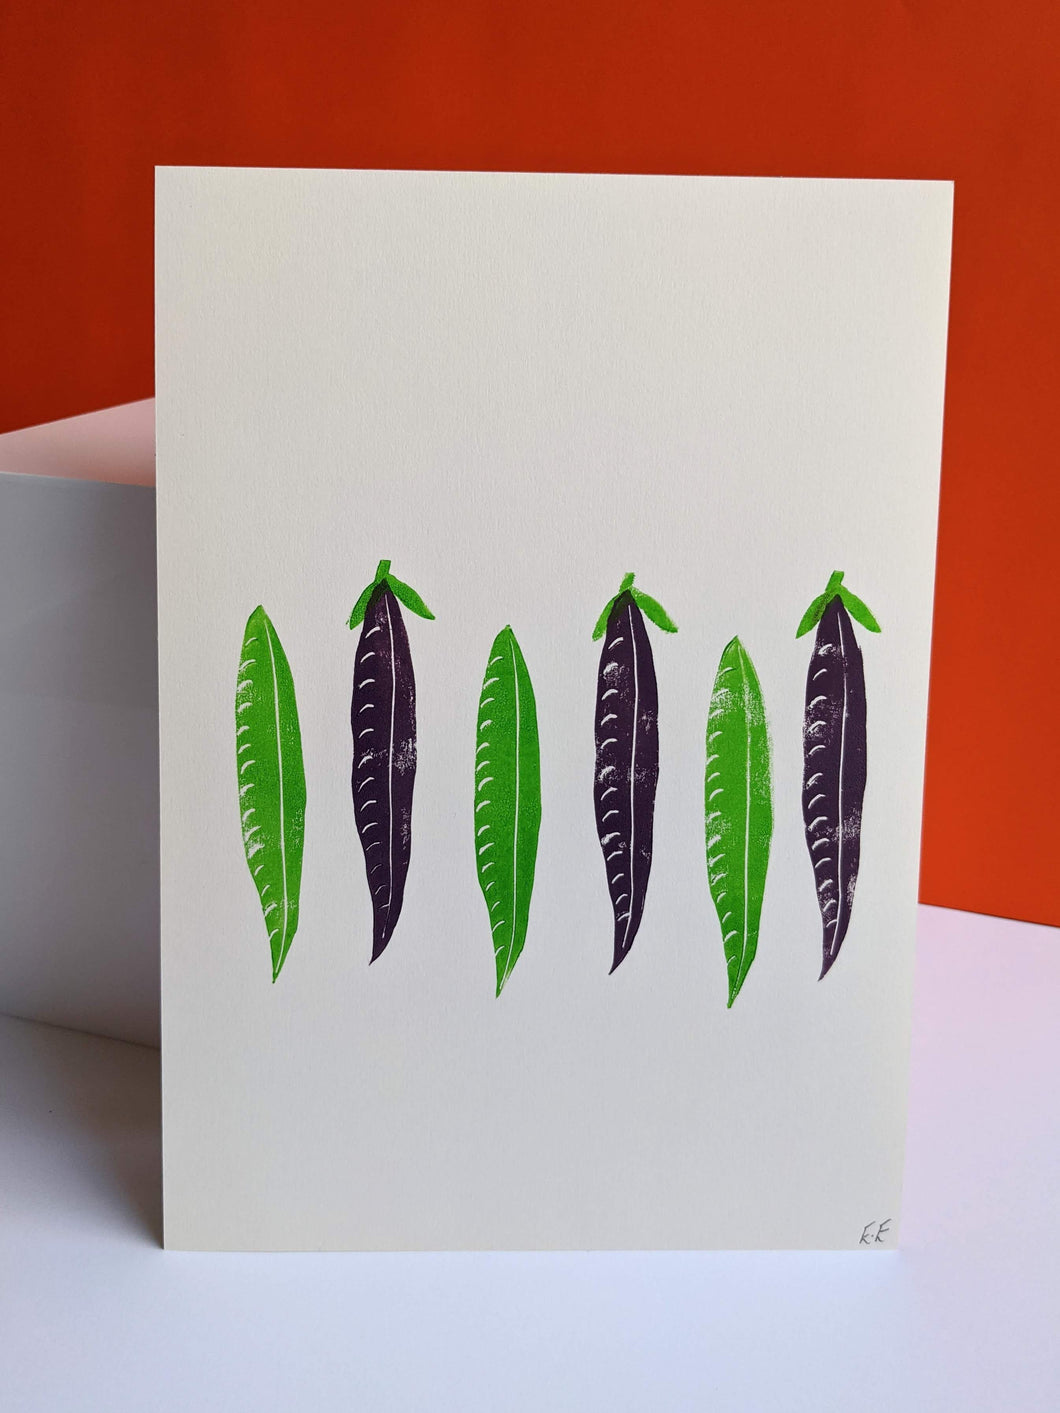 A print of three green pea pods and three purple pea pods against an orange background